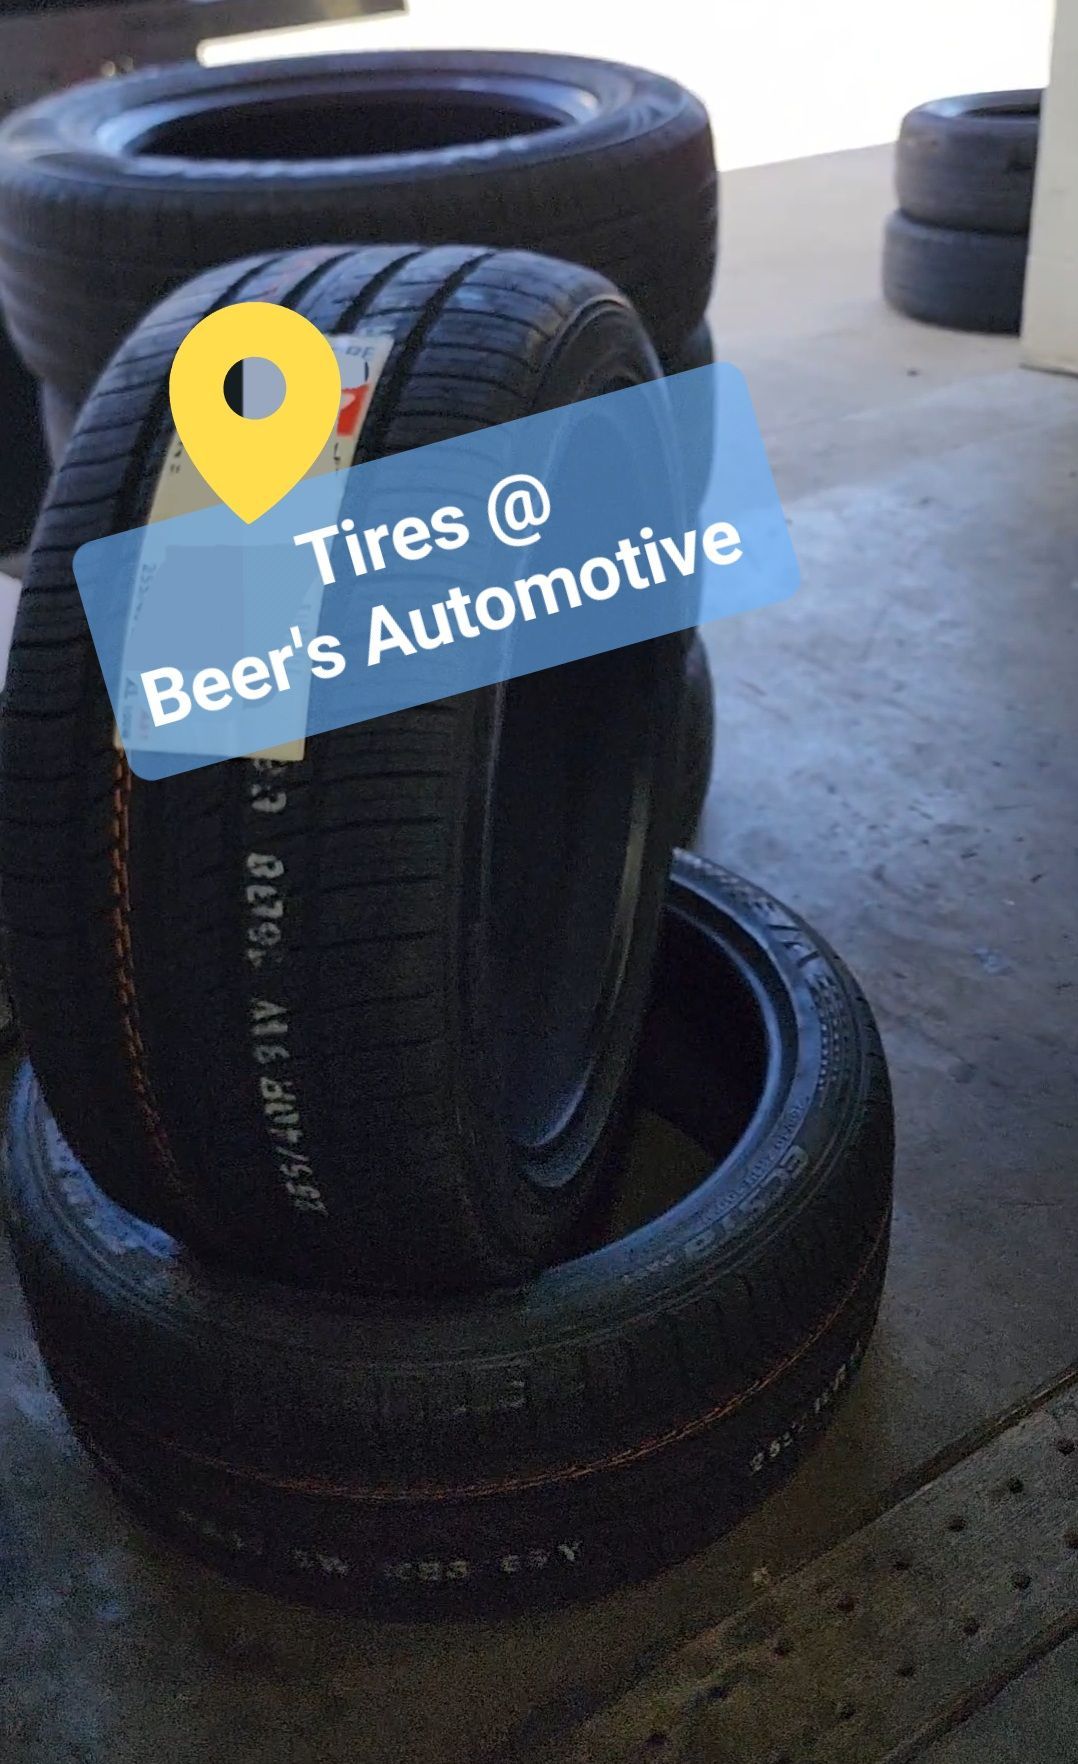 Find Your Tires at Beer's Automotive Services and Repair